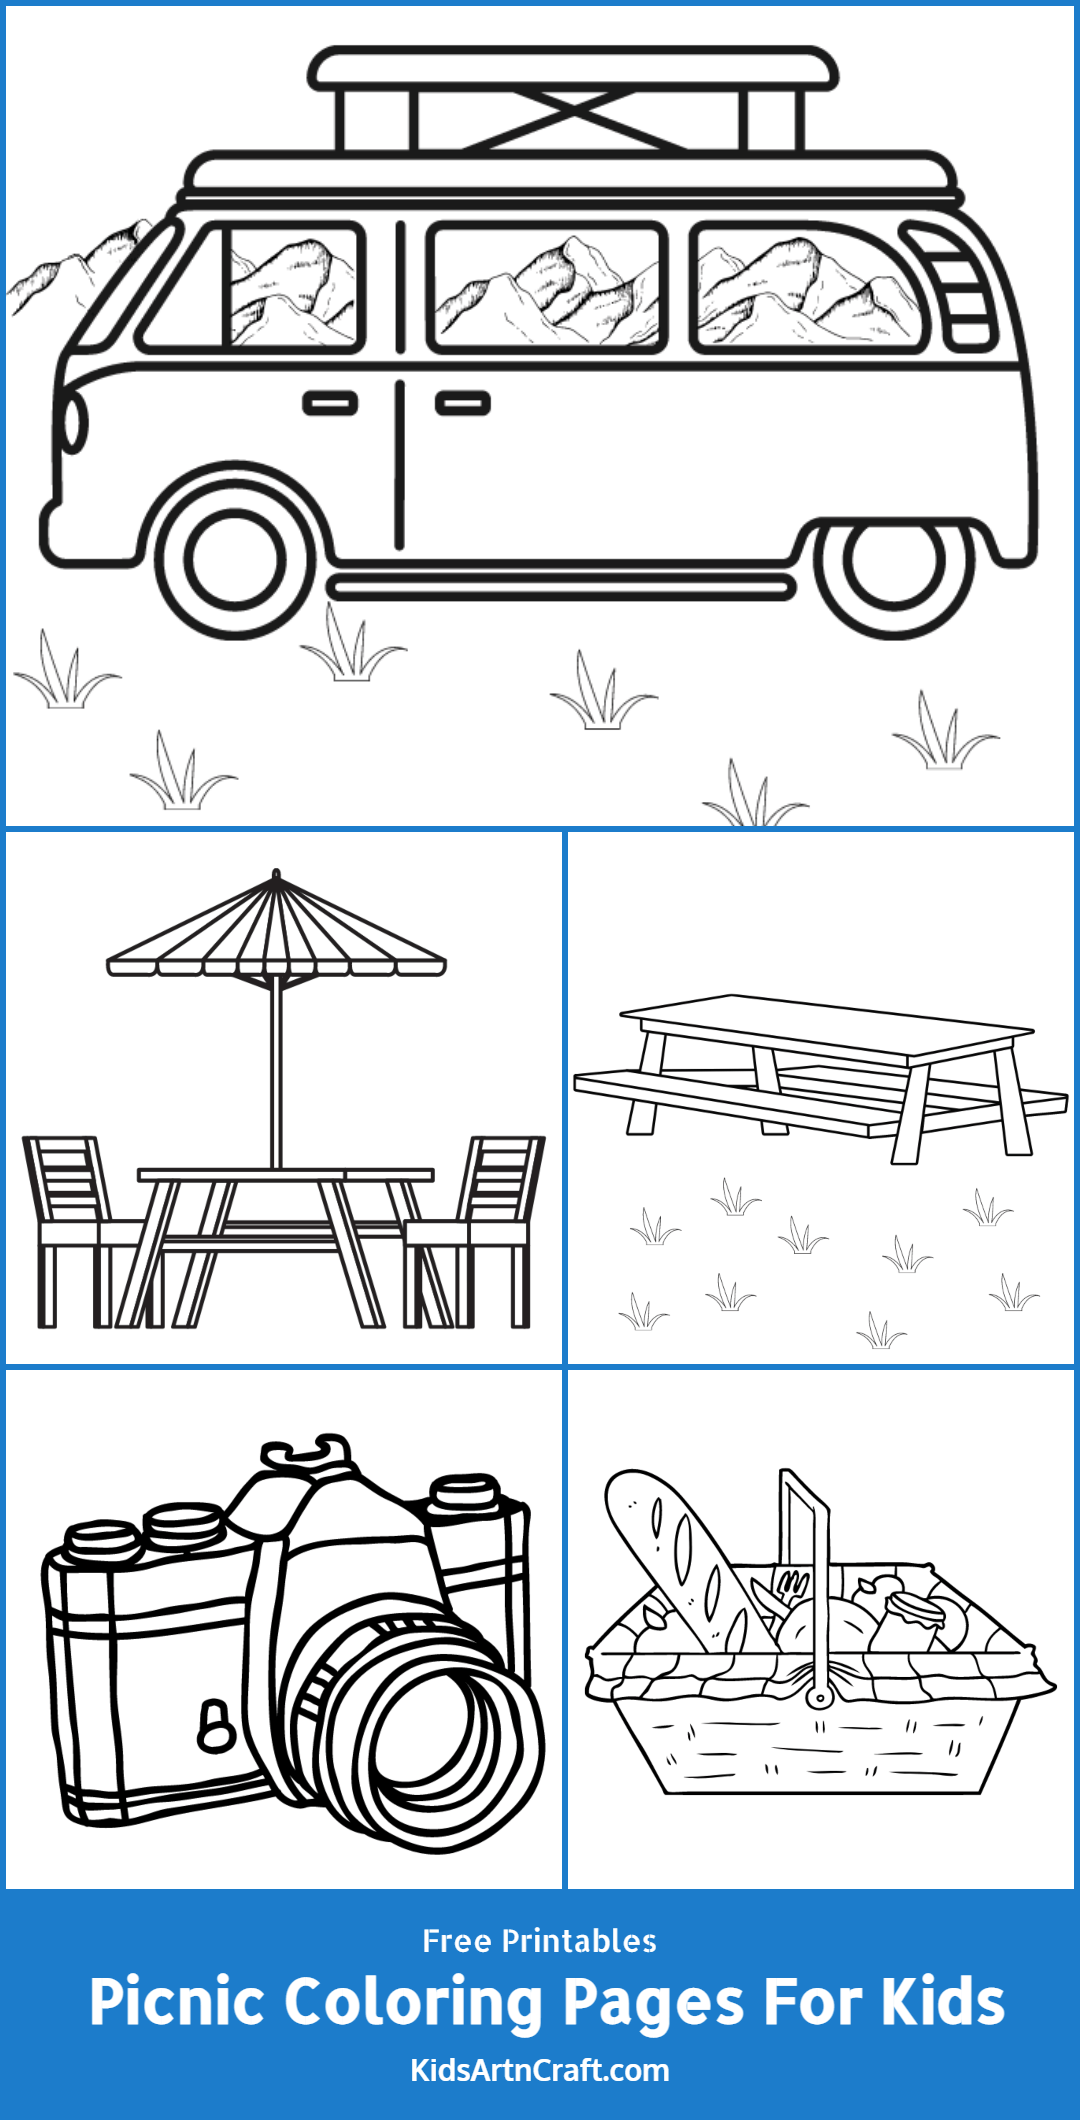 Picnic Coloring Pages For Kids – Free Printables